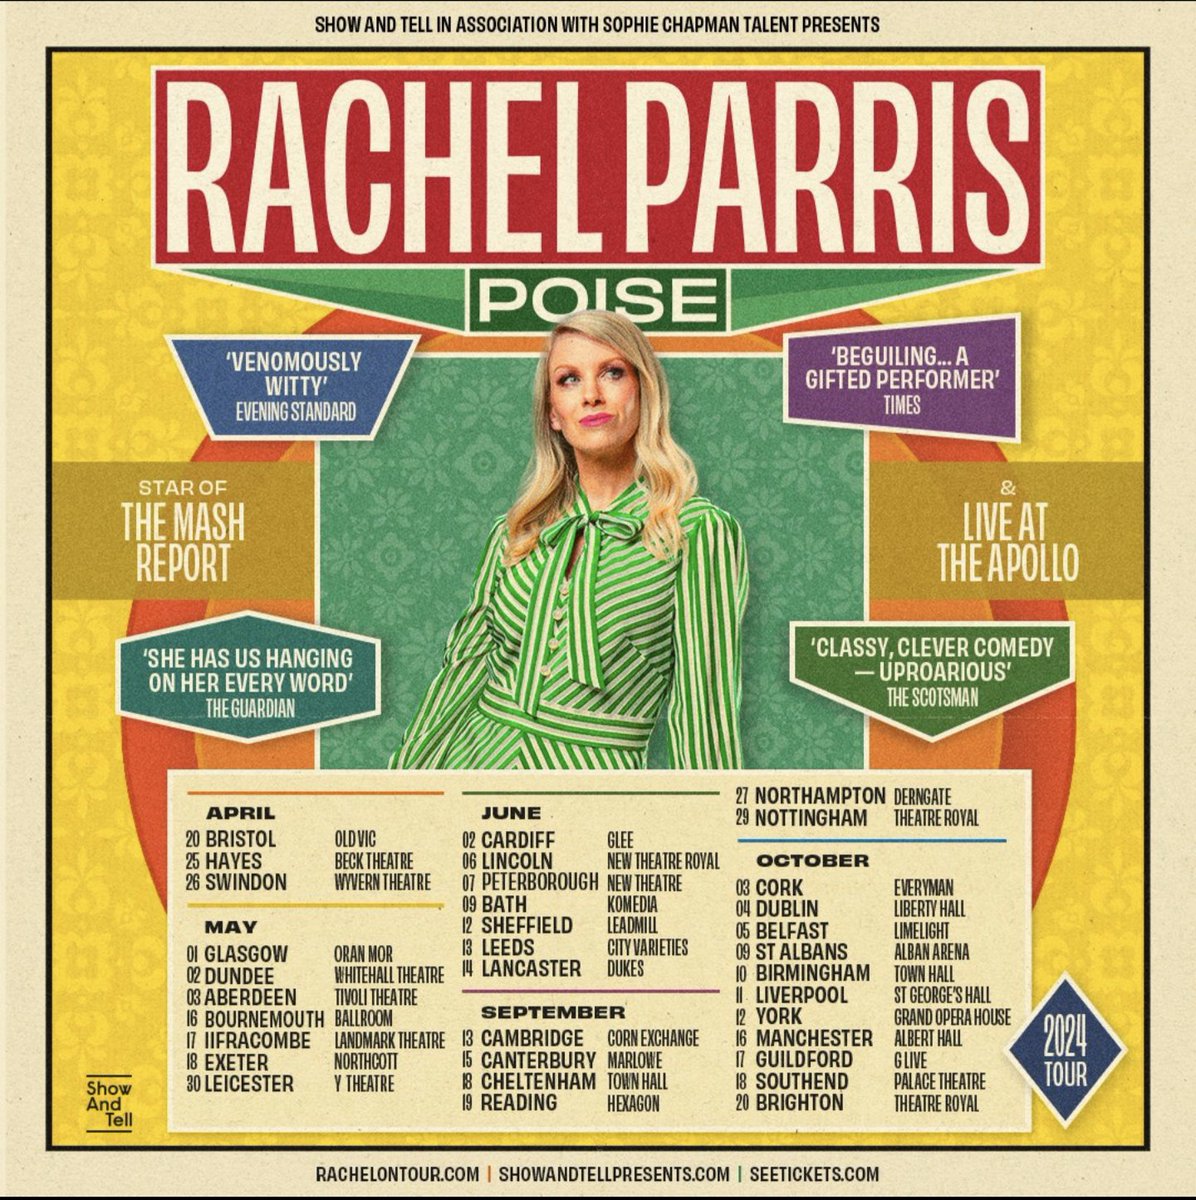 Watched the hilarious @rachelparris live last night at the start of her #Poise tour. I thoroughly recommend, especially if, like me, you're a woman hurtling towards 40!